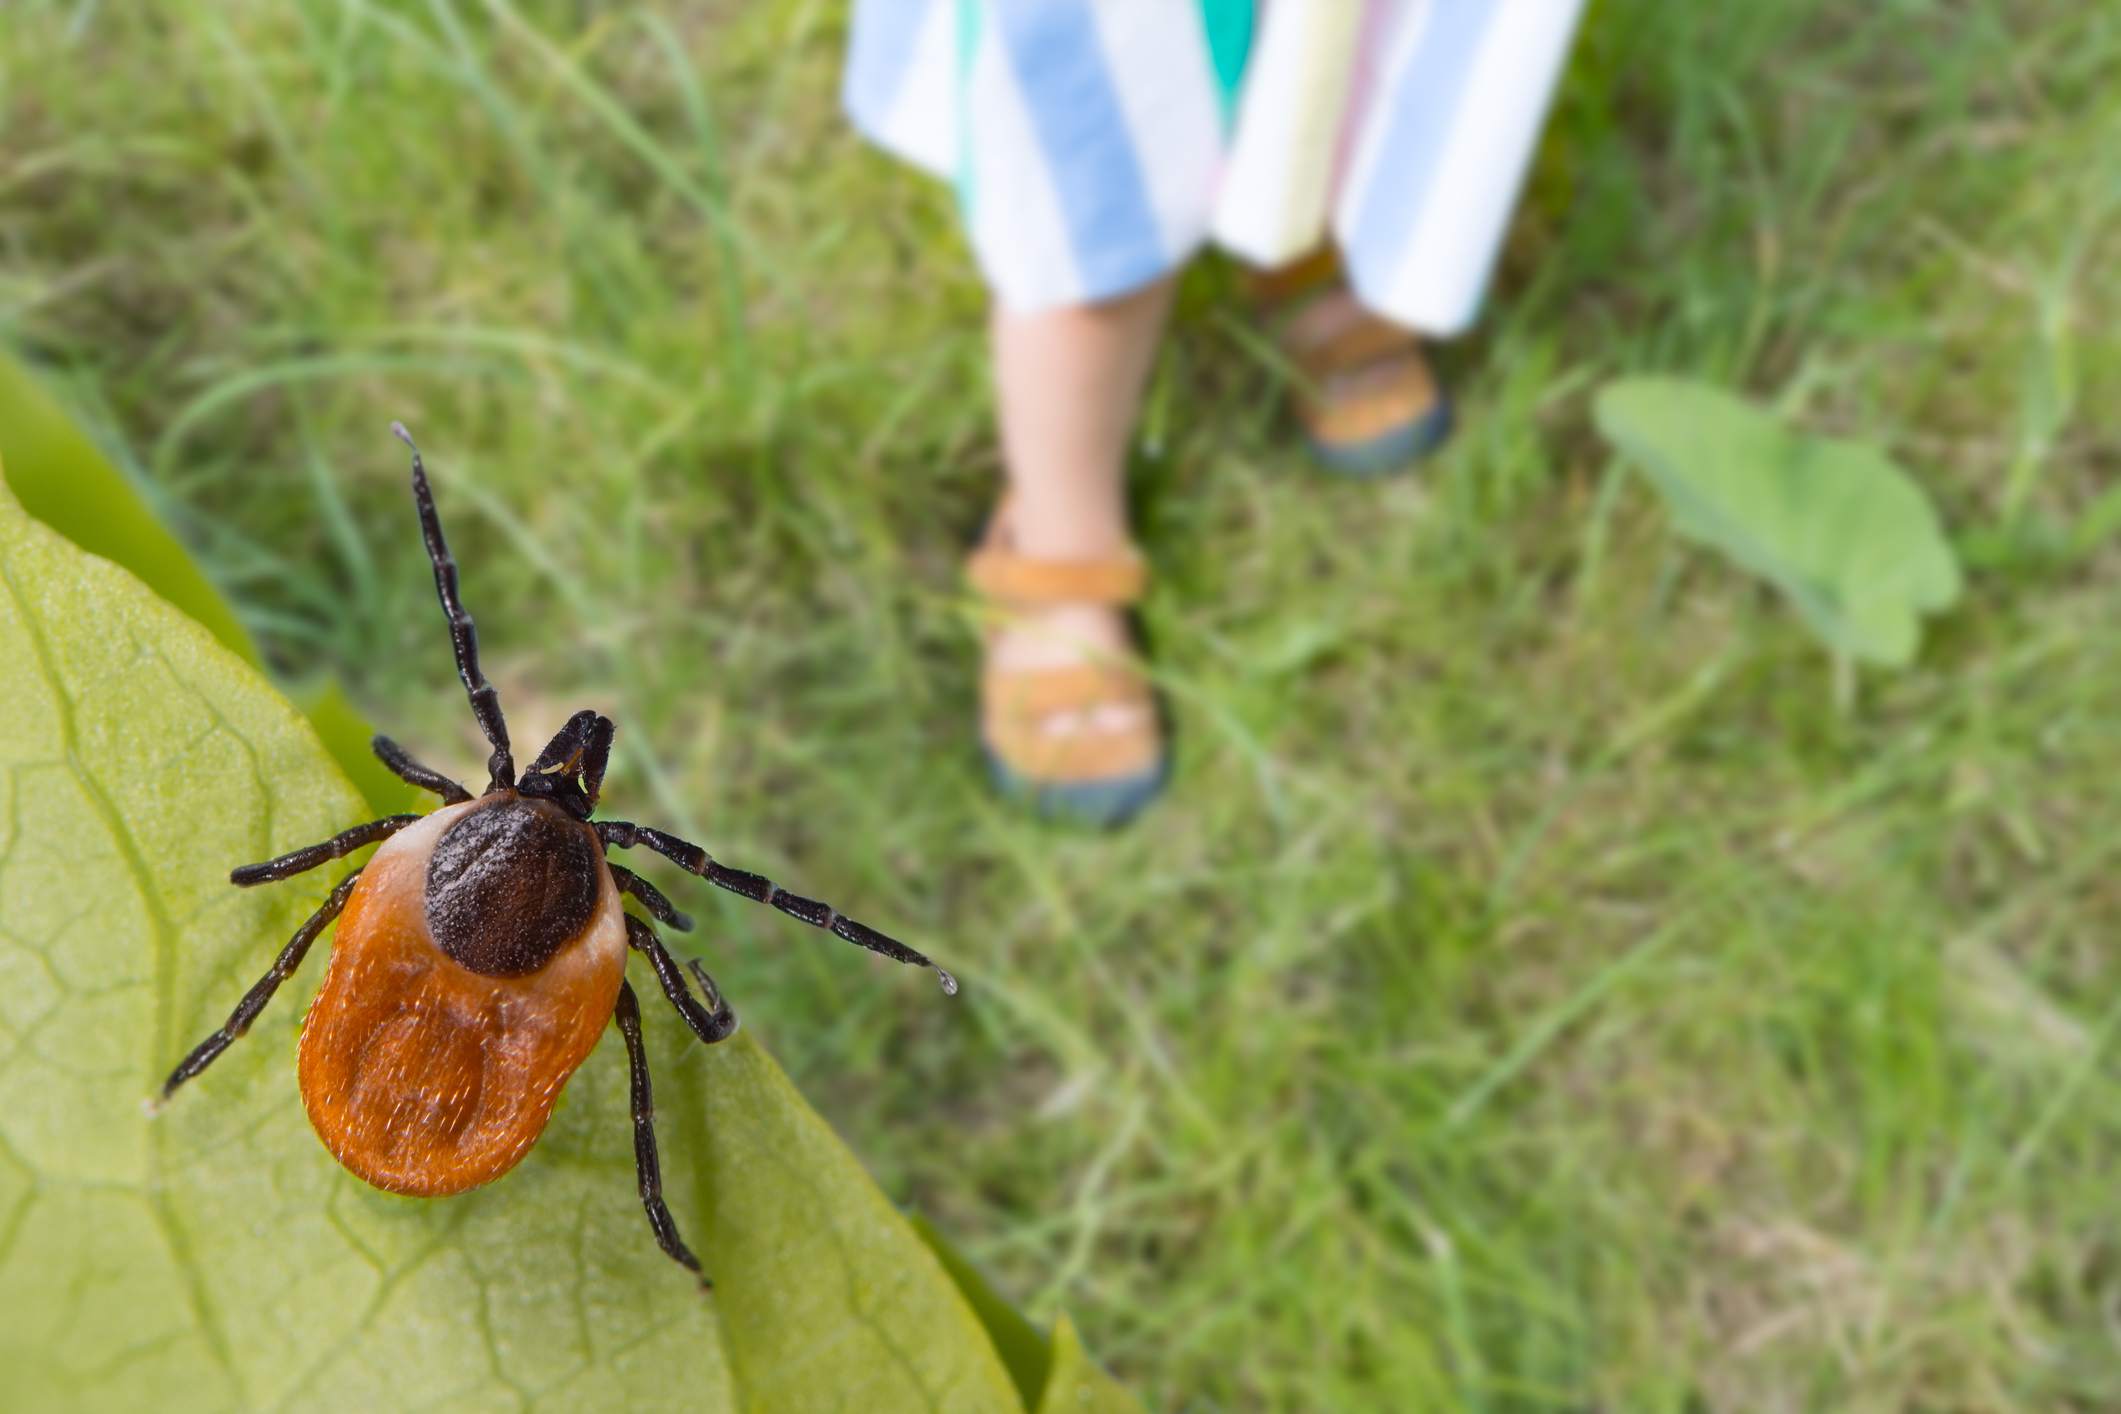 A brown and black tick lays on a tree leaf, ready to drop down on an unsuspecting person walking by